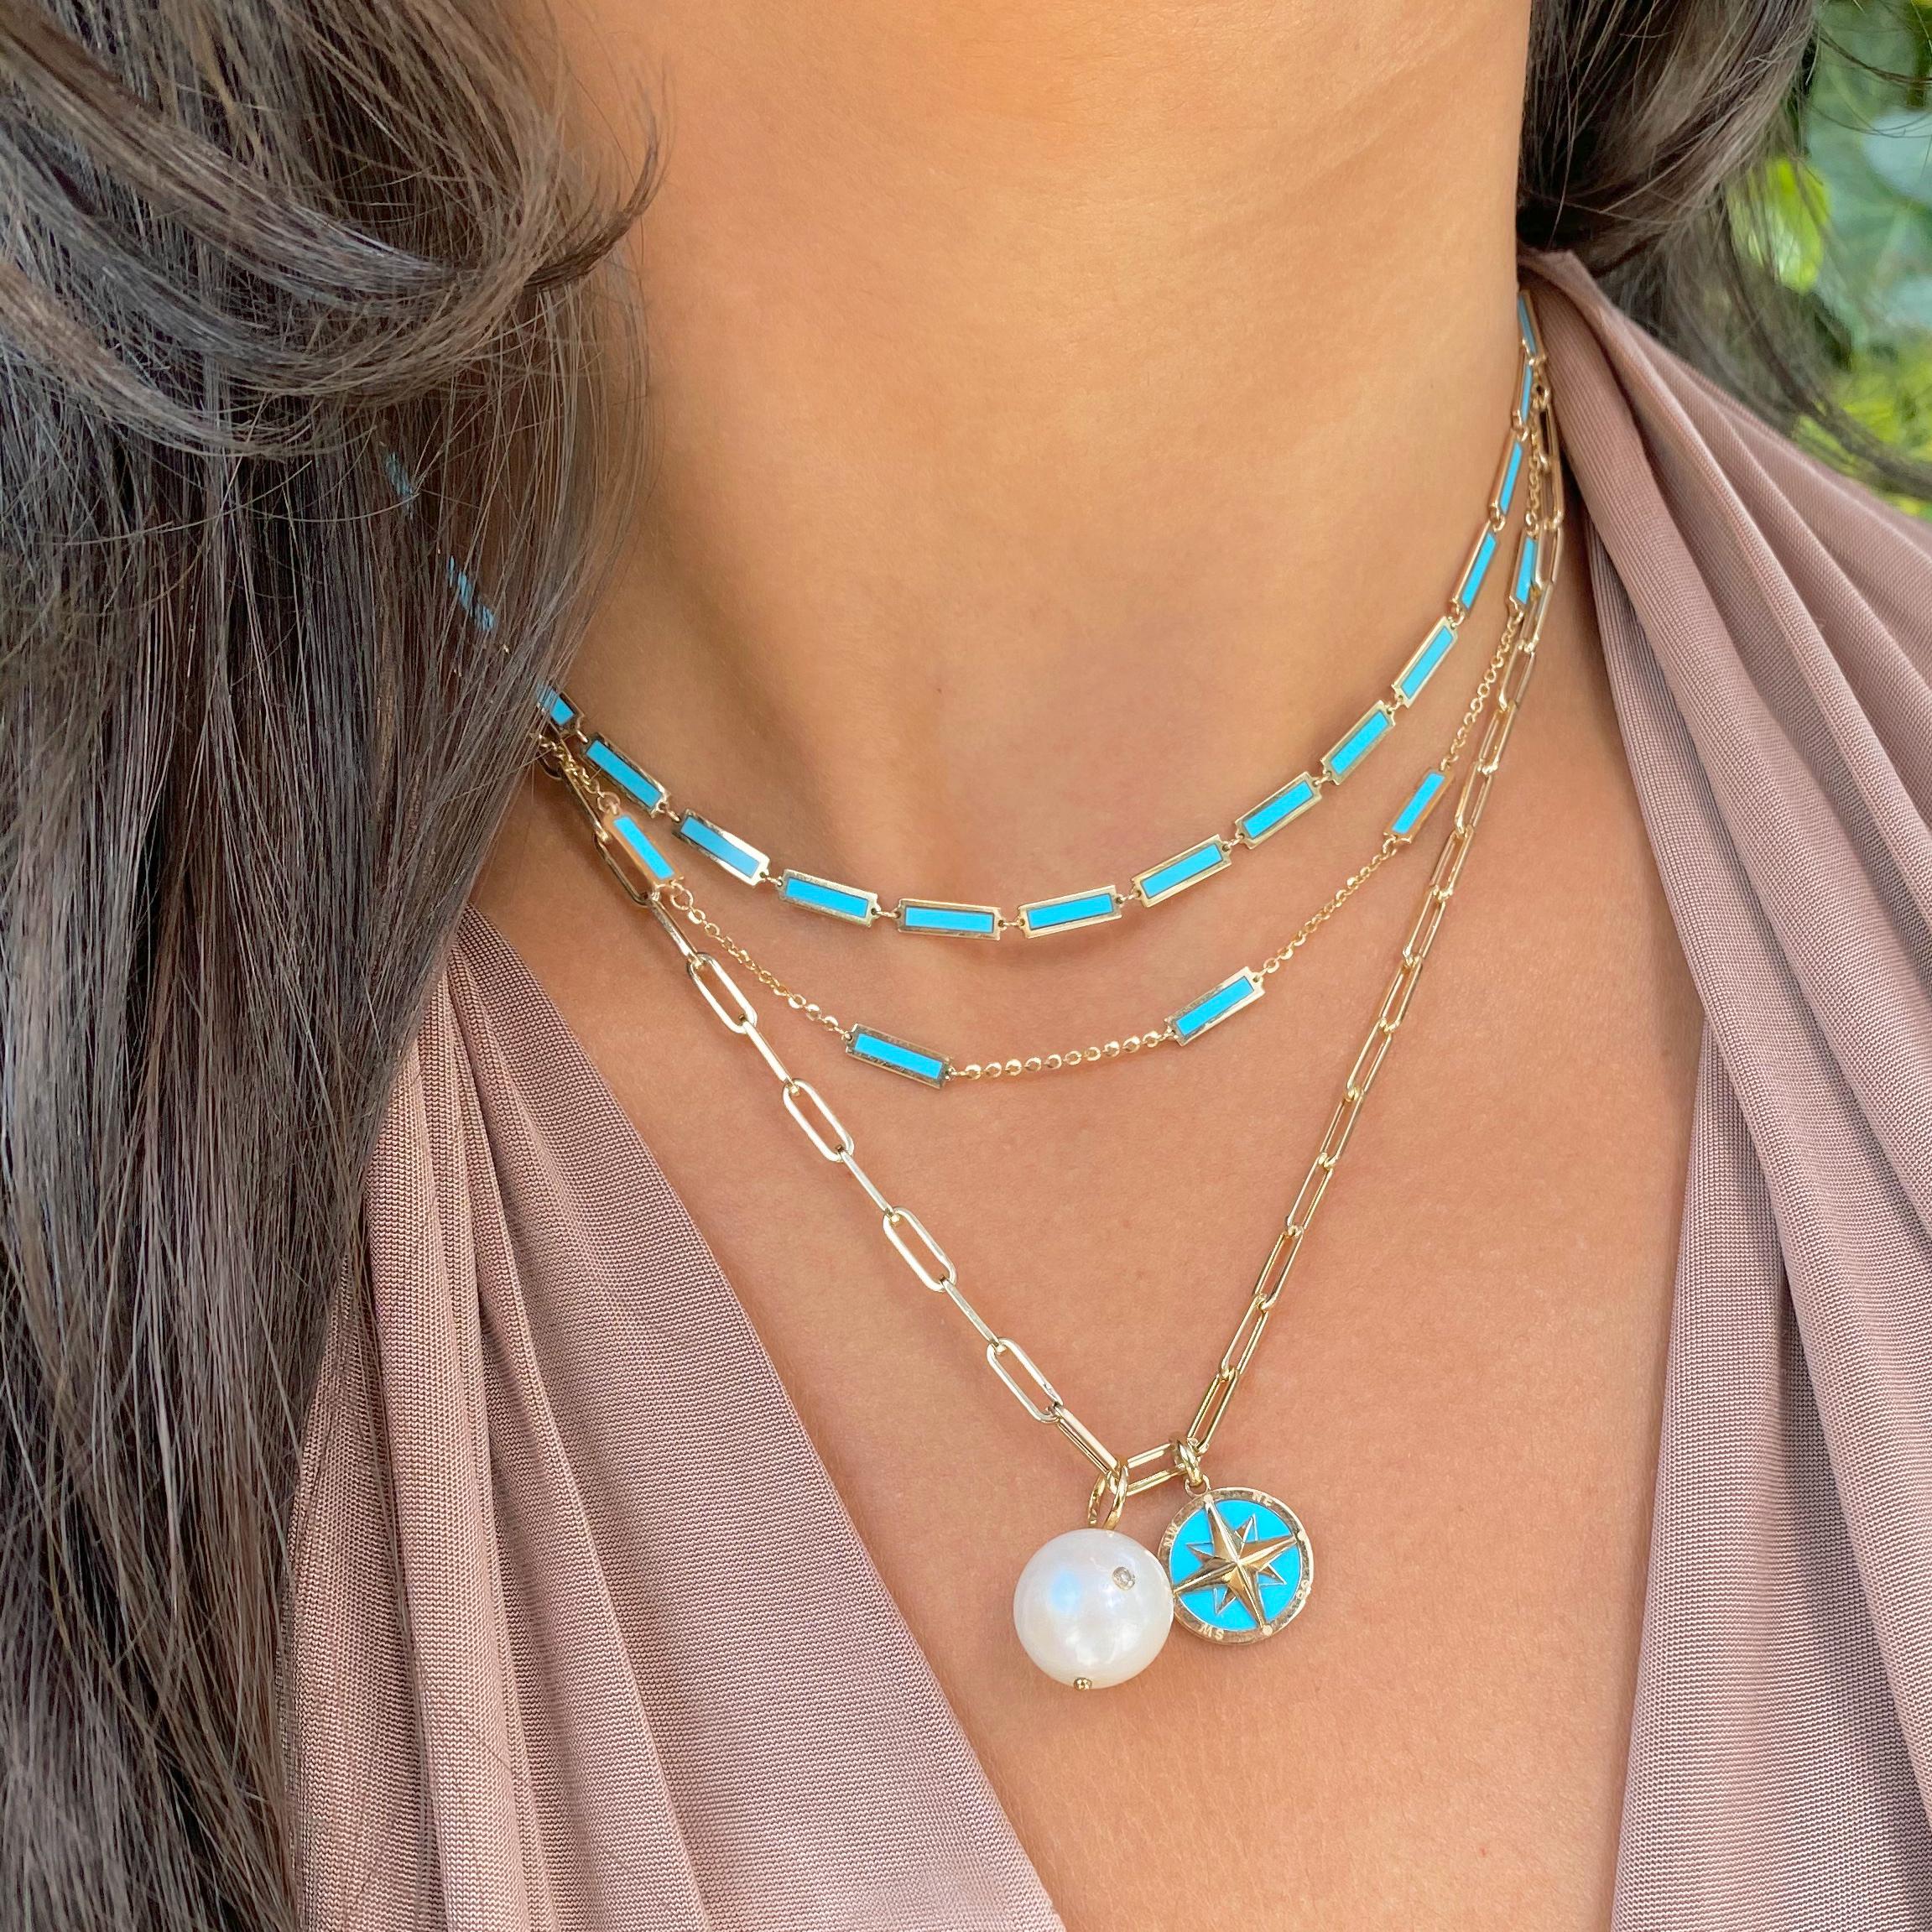 Looking for the ultimate addition to your jewelry collection? Look no further than this stunning yet simple necklace! With its unique and eye-catching design, this piece is guaranteed to add a pop of color to any outfit. Layer it with your favorite